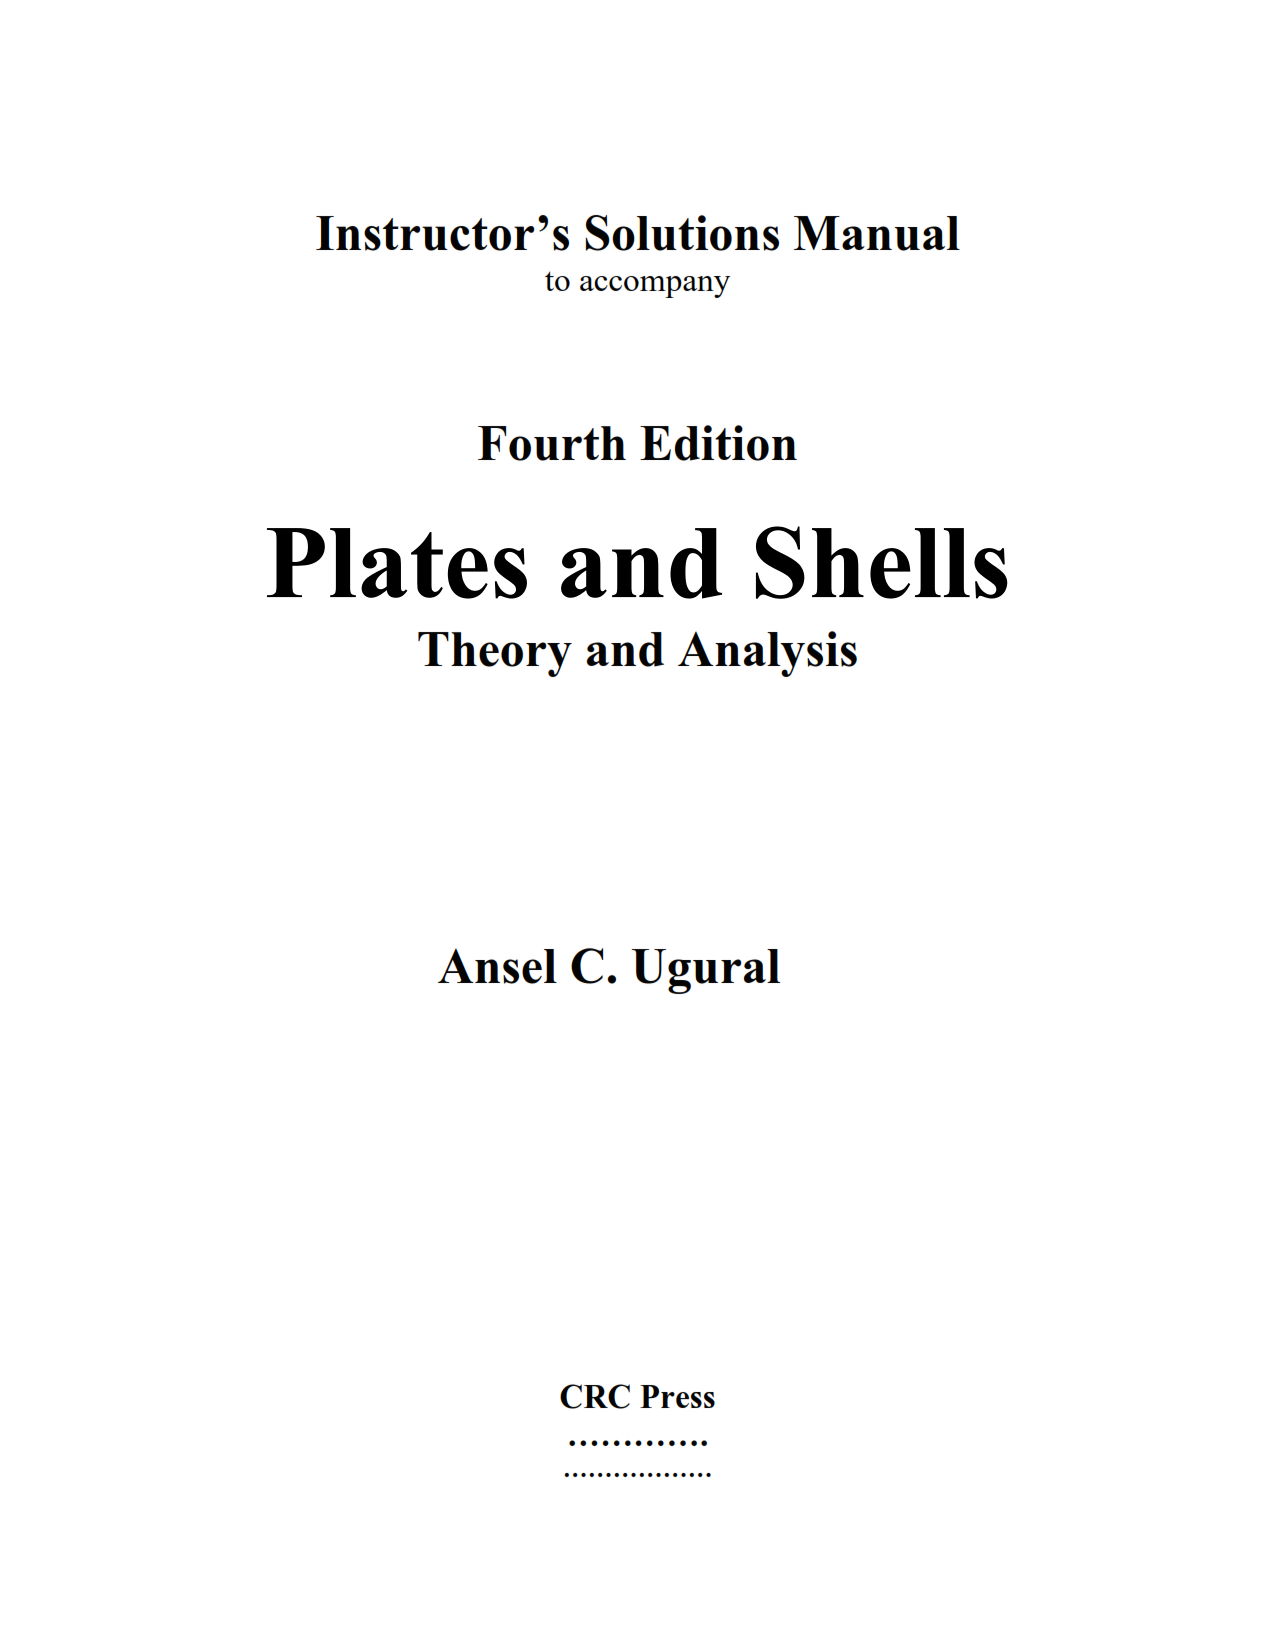 download free Plates and shells theory and analysis 4th edition written by Ugural Ansel solution manual eBook in pdf format